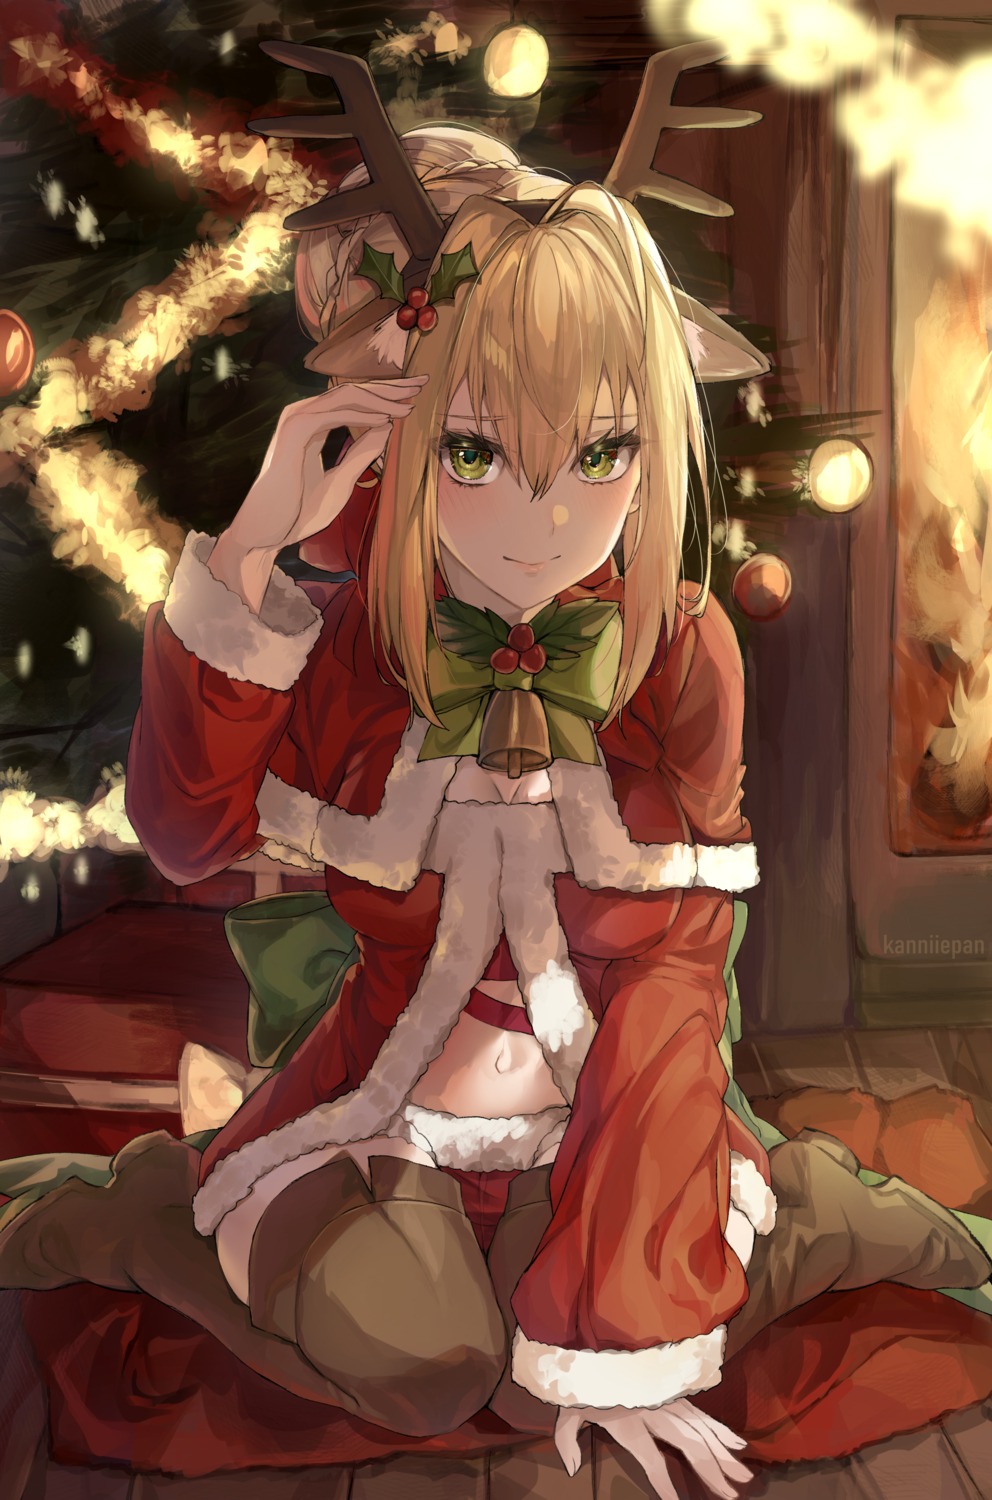 animal_ears christmas cleavage fate/grand_order horns kanniiepan saber_extra thighhighs